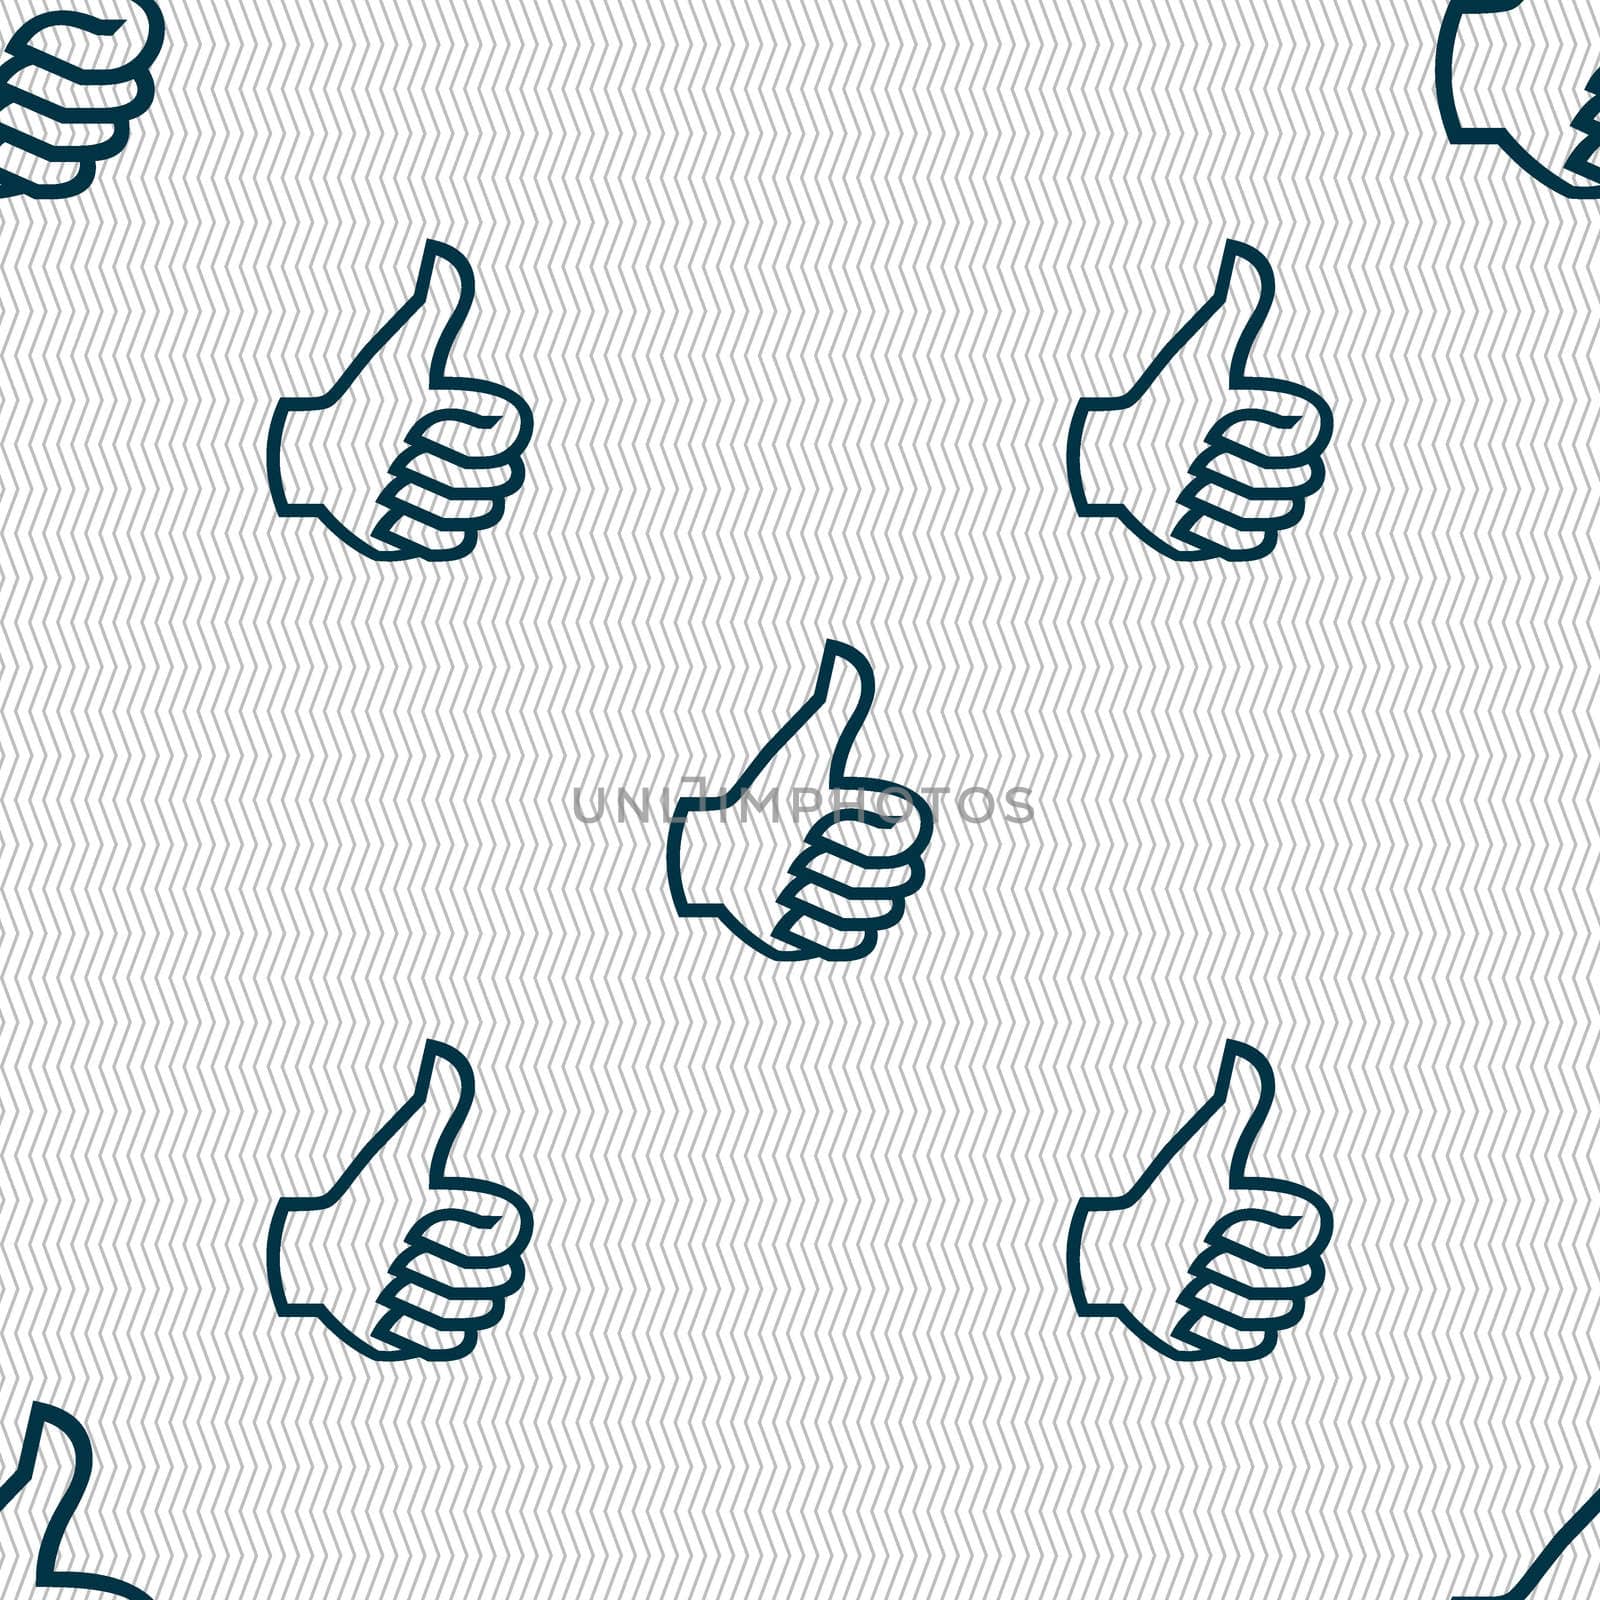 Like sign icon. Thumb up sign. Hand finger up. Seamless abstract background with geometric shapes. illustration